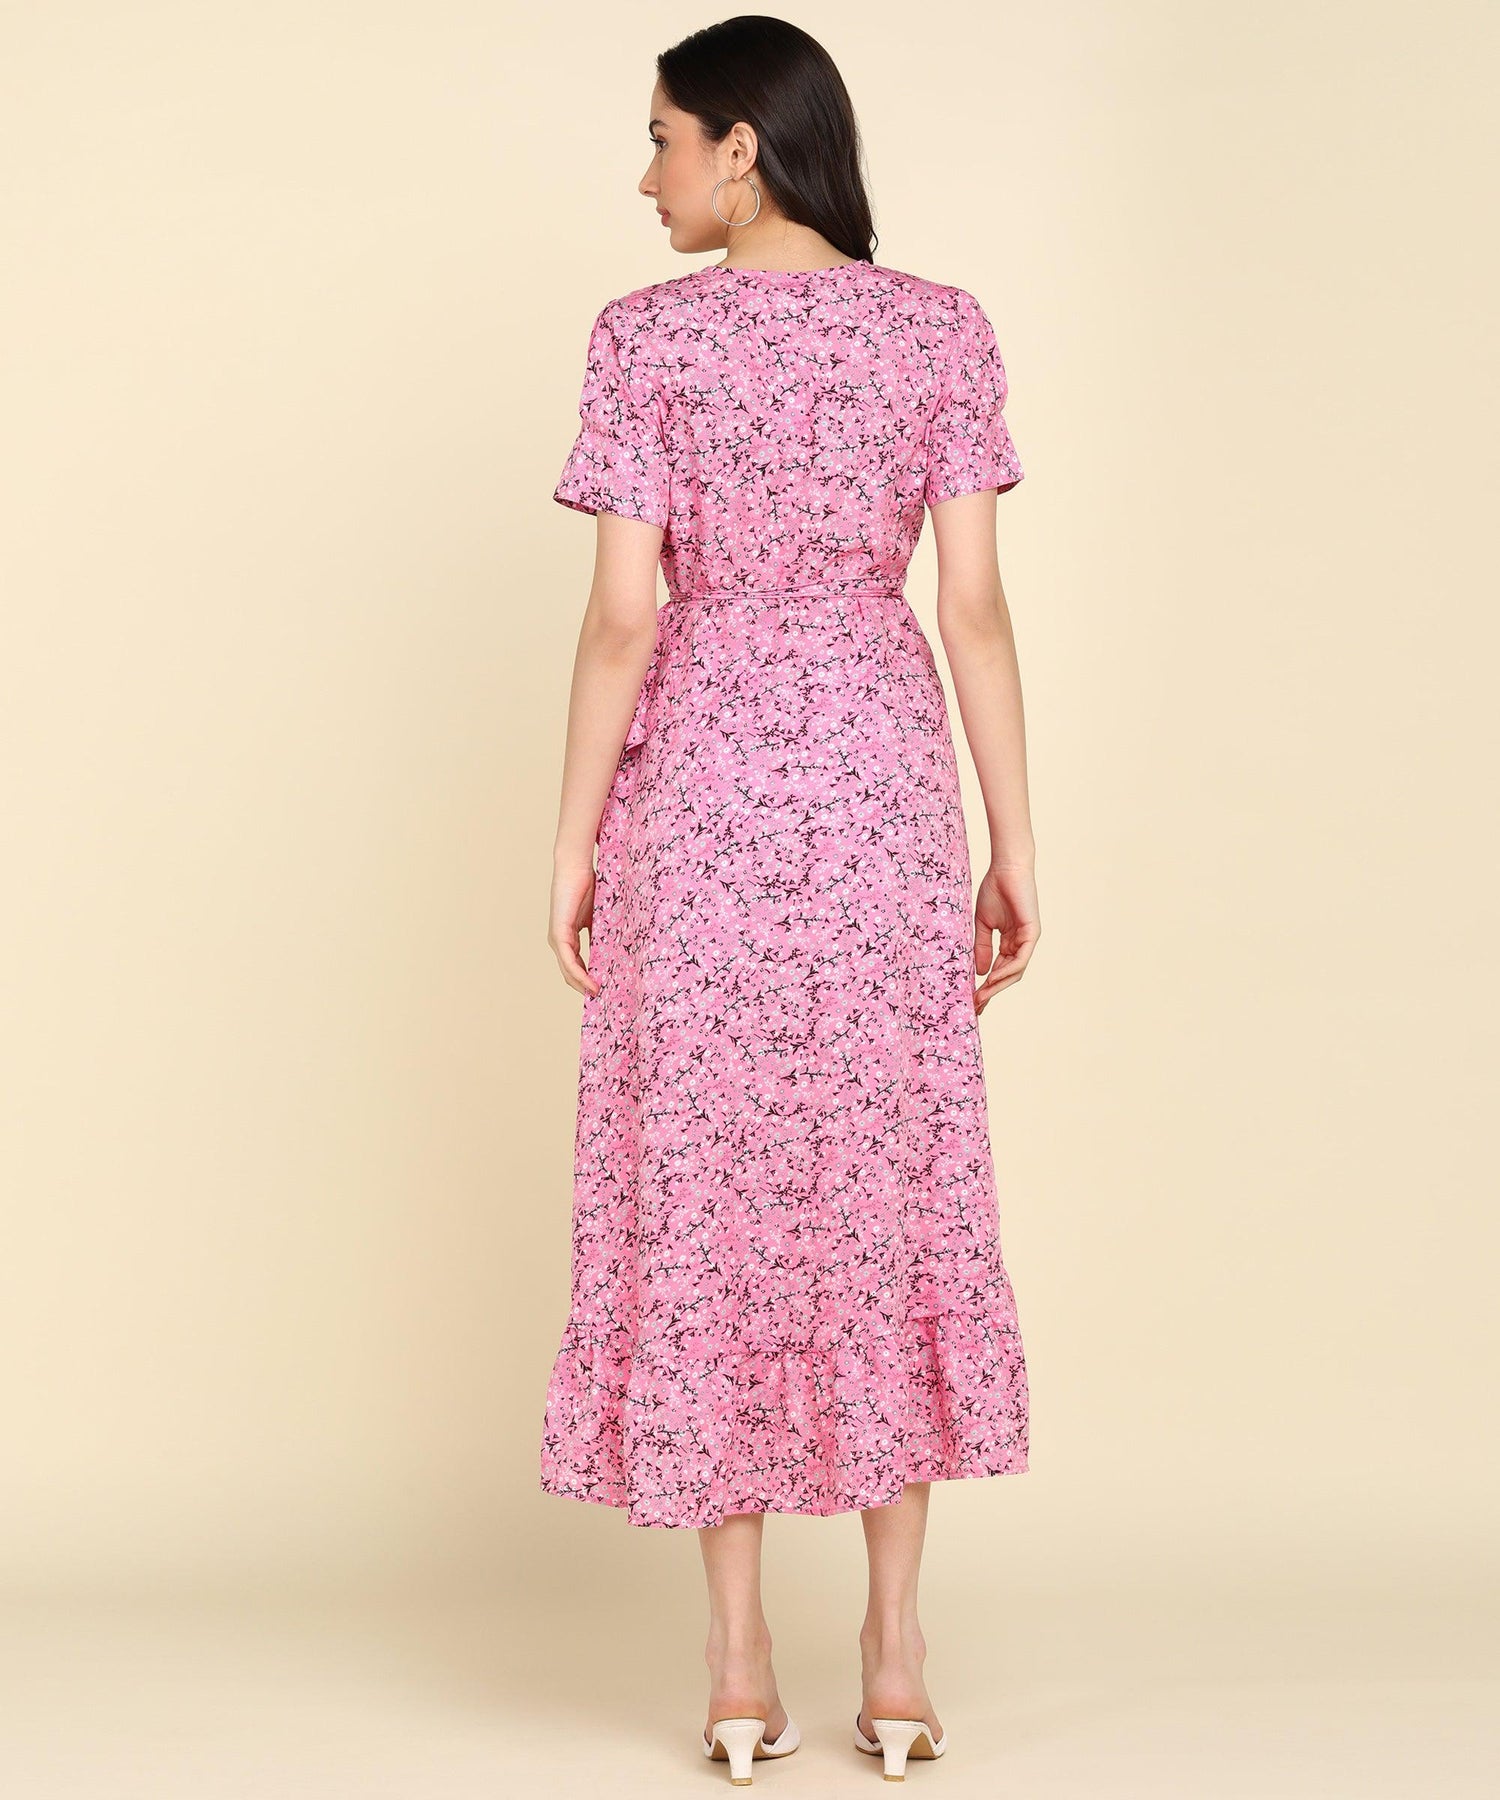 Pink Floral Printed Frill Dress - Znxclothing